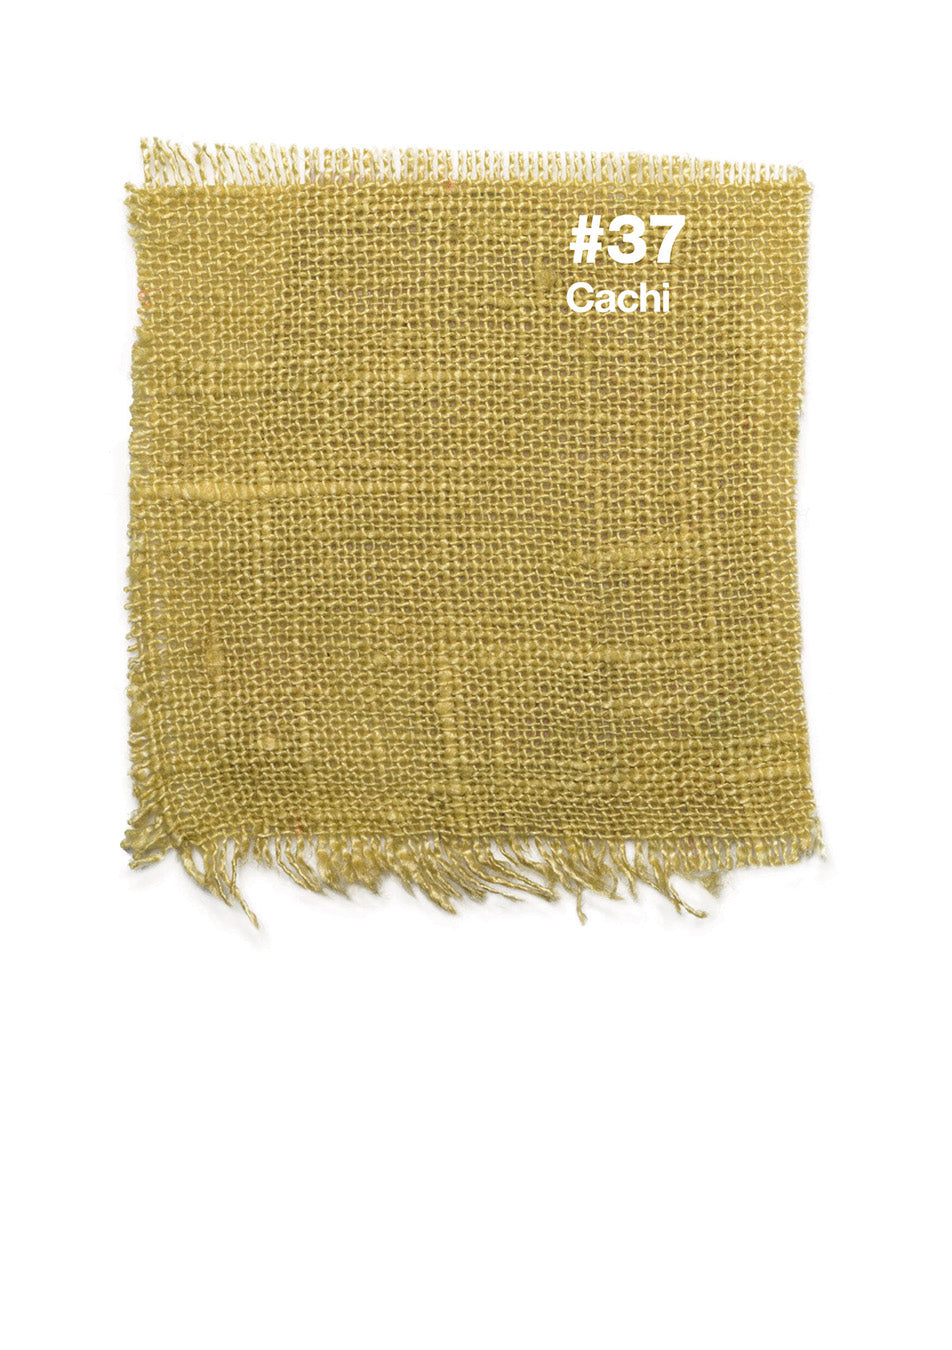 Table linen n.37 Cachi